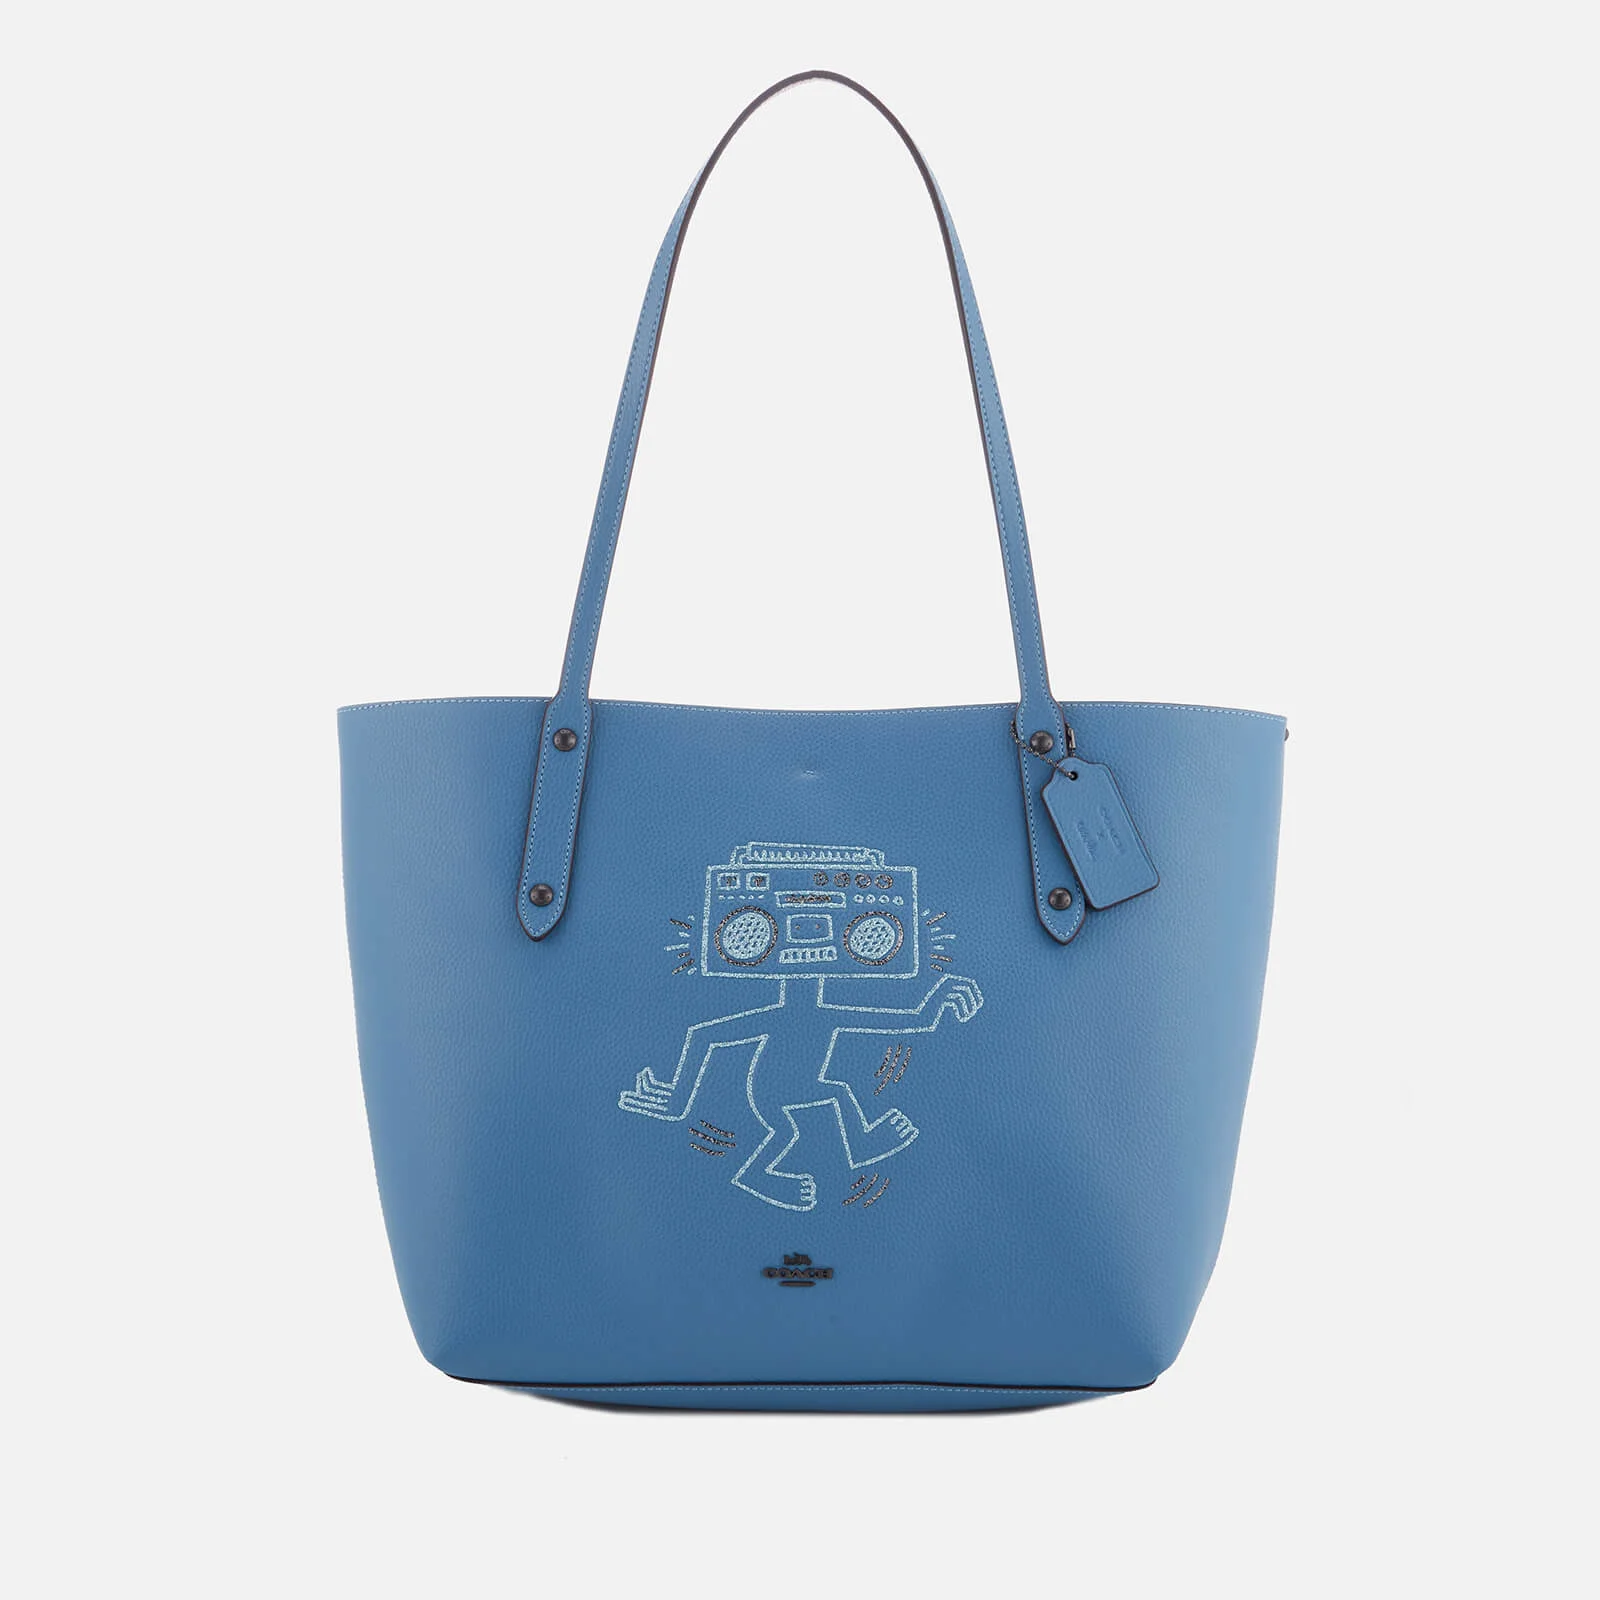 Coach Women's X Keith Haring Market Tote Bag - Sky Blue Image 1